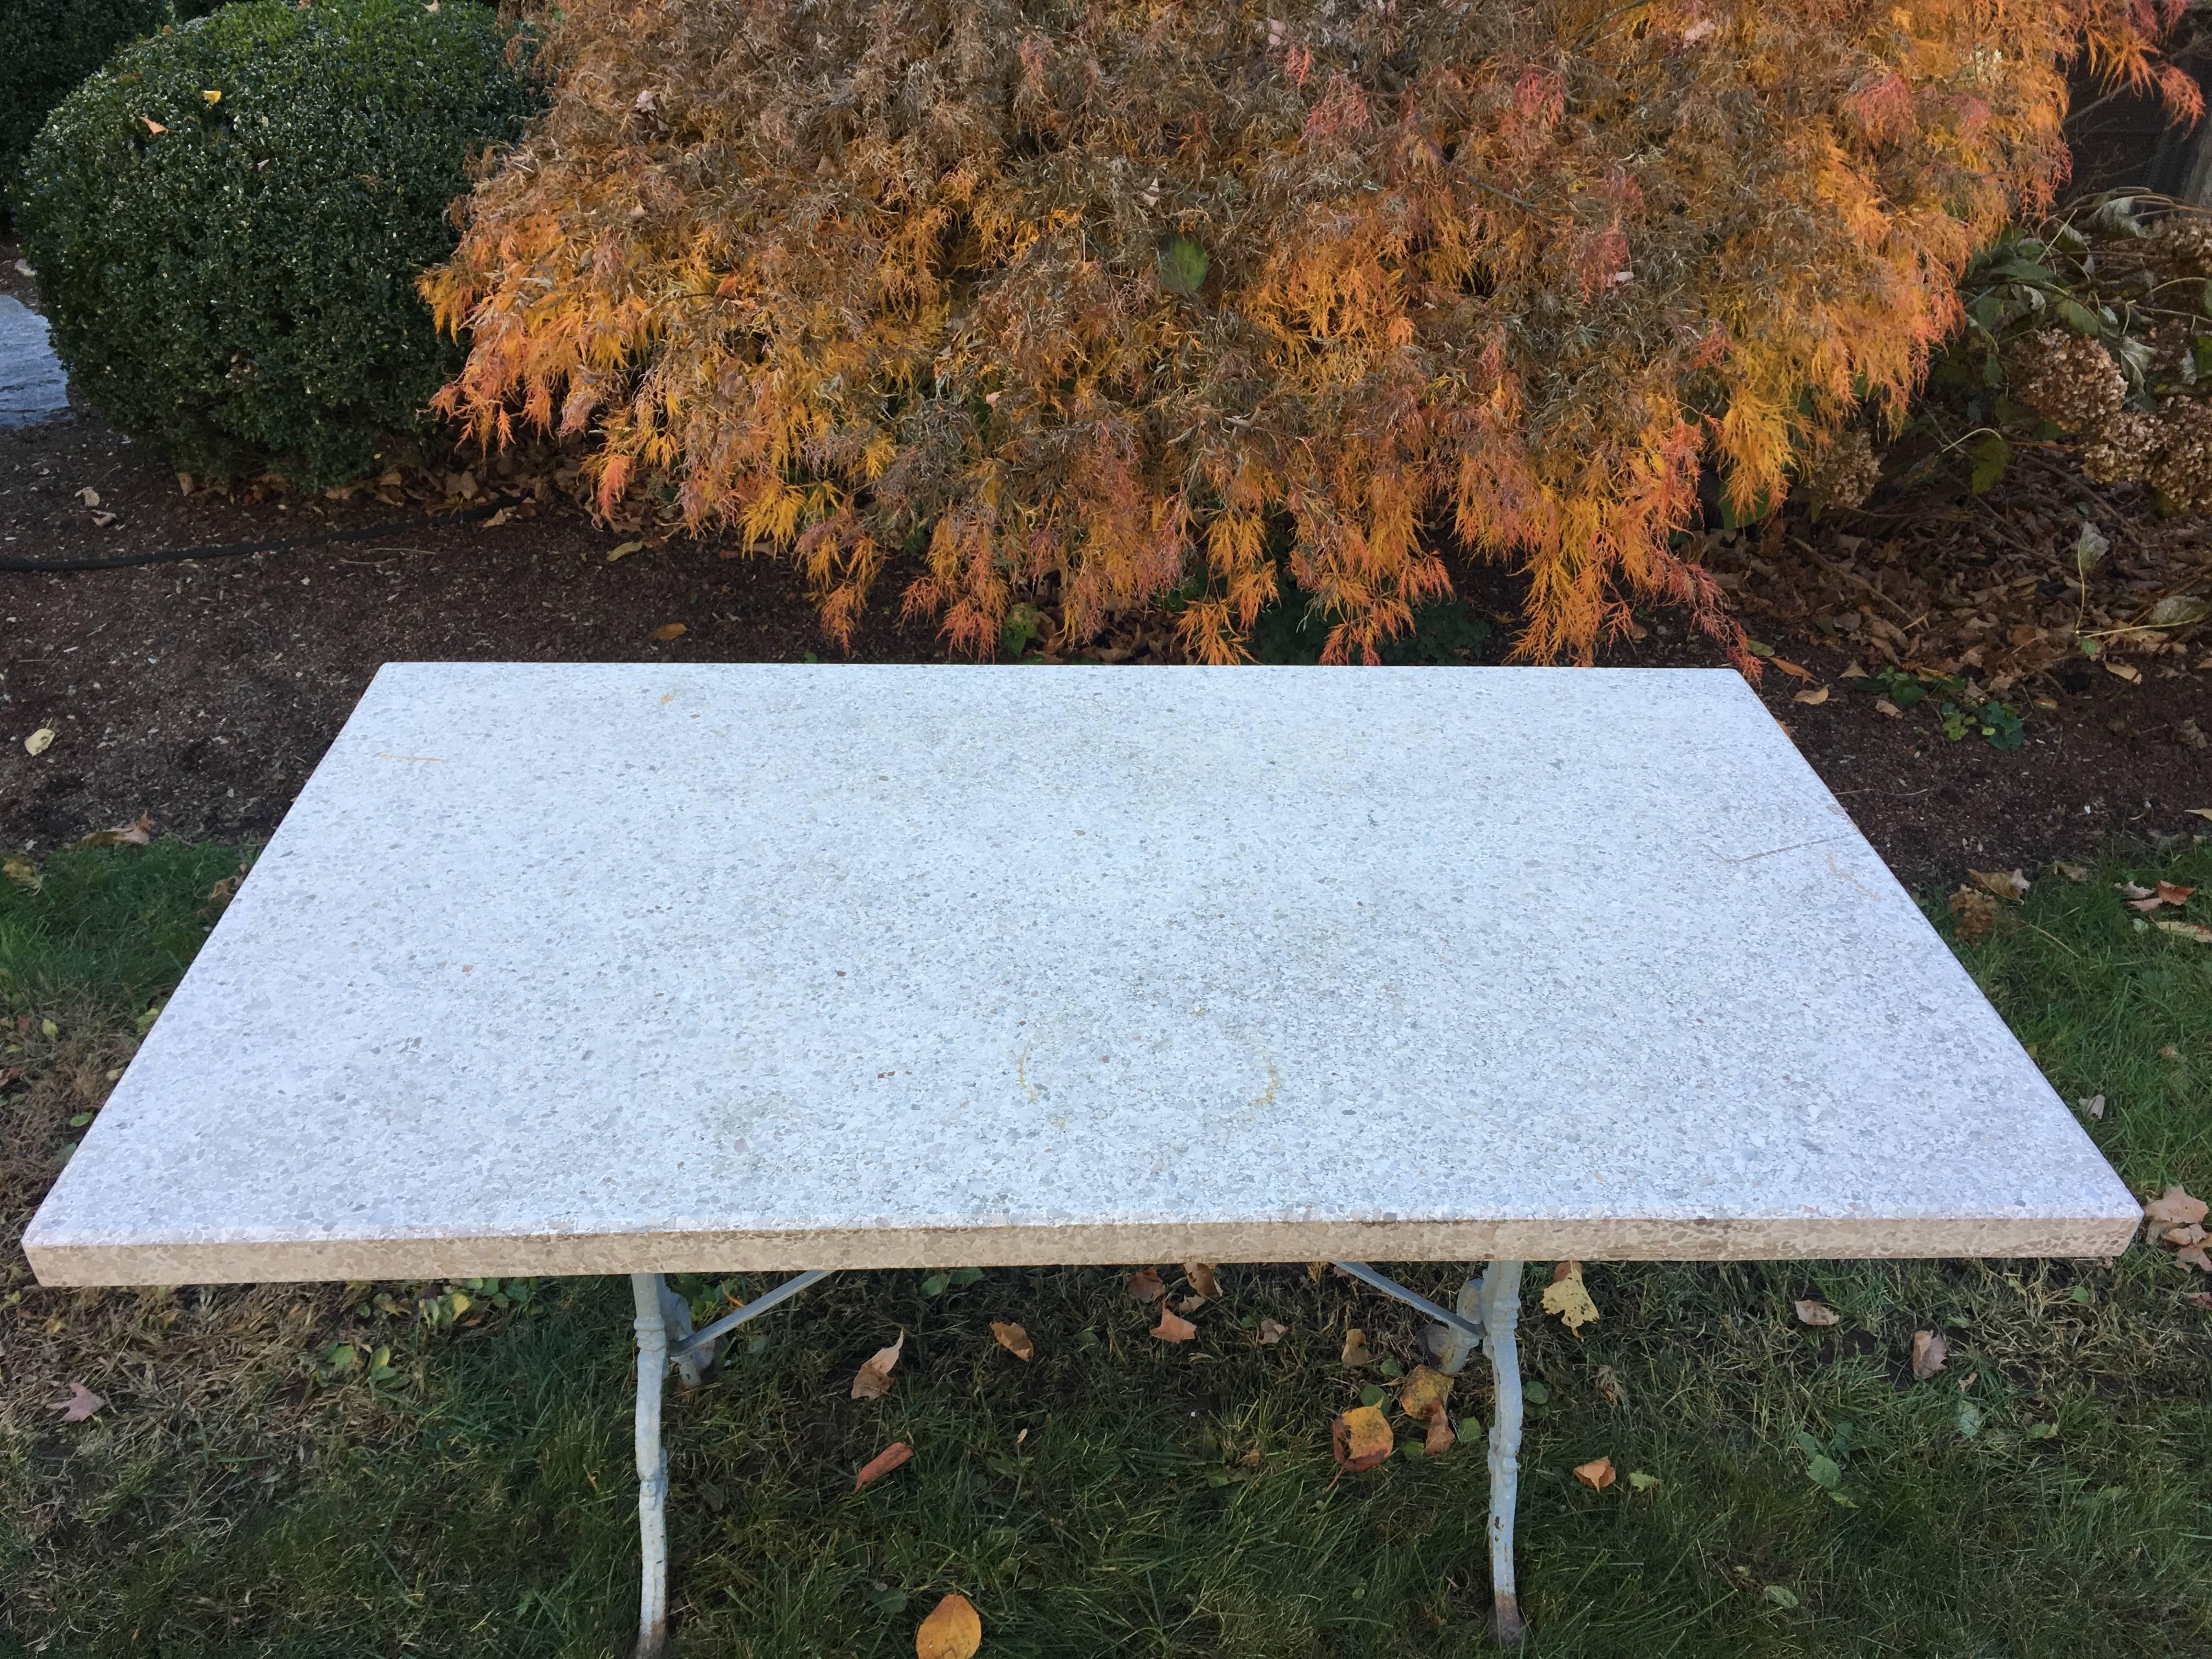 20th Century French Terrazzo-Topped Garden Dining Set for Four, Signed Godin For Sale